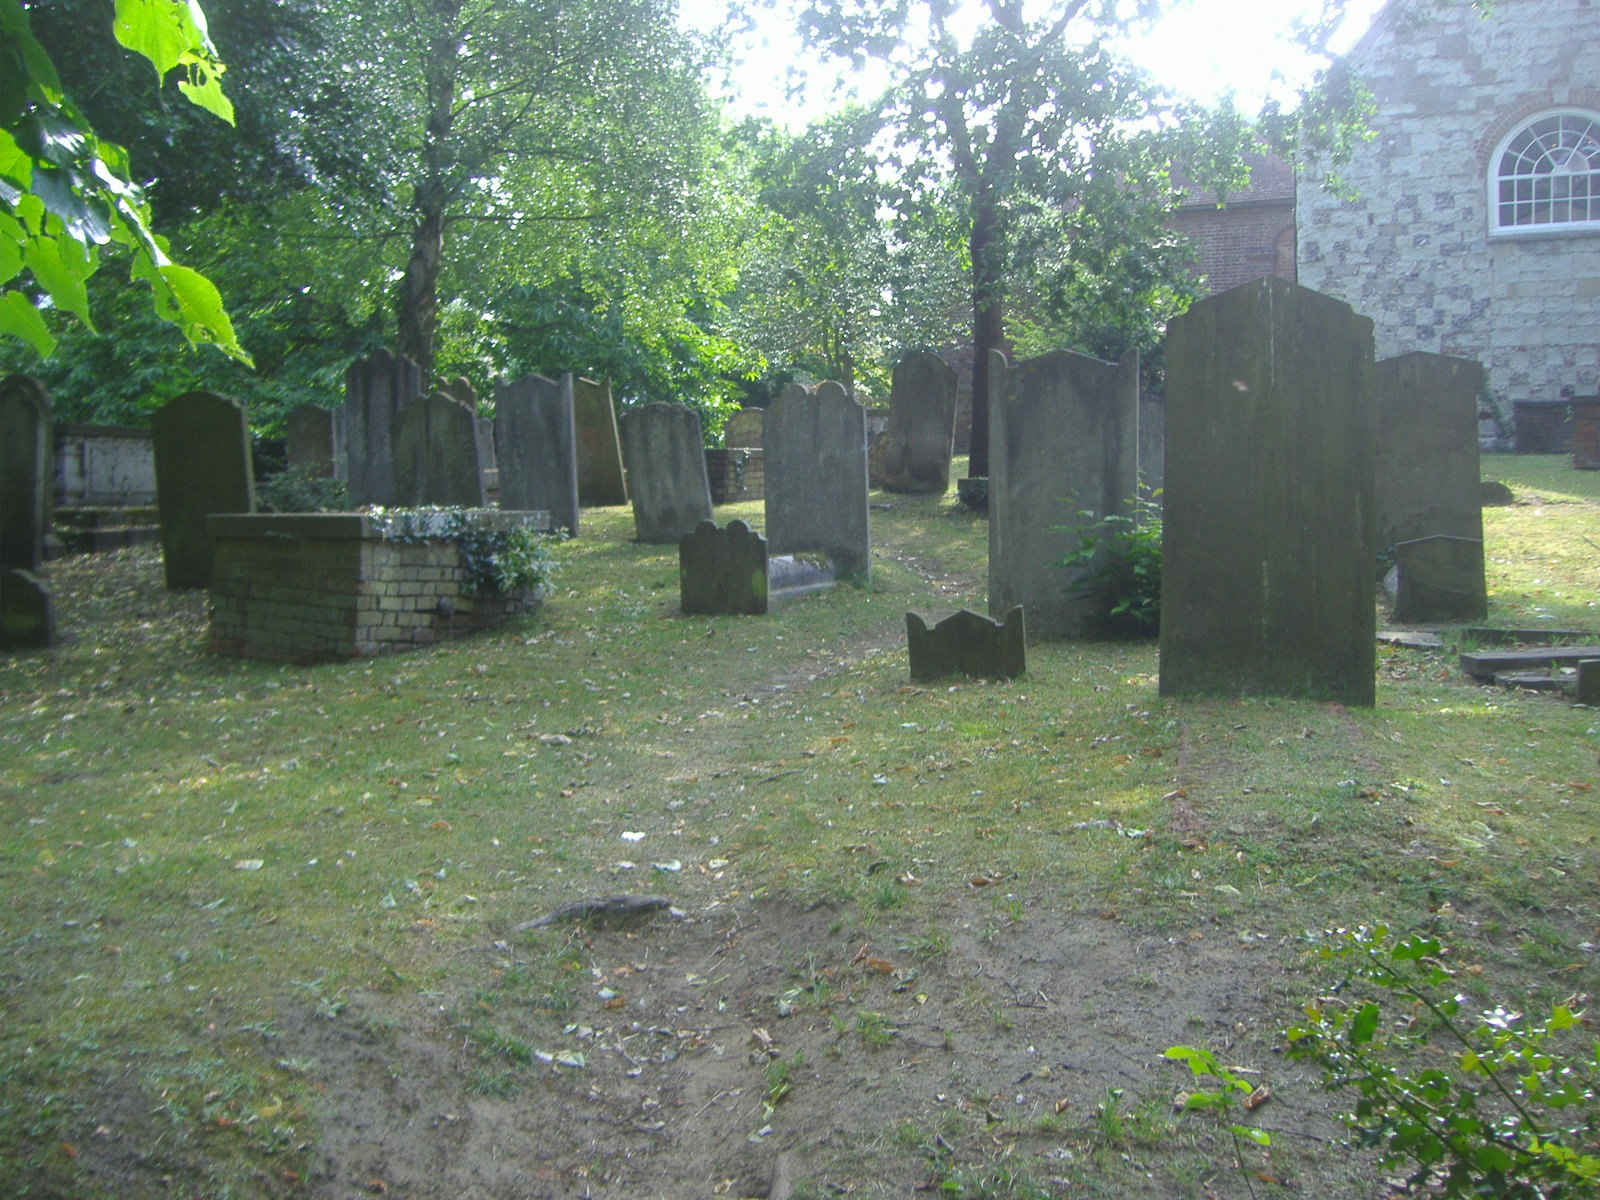 a group of old cemetery graves surrounded by greenery